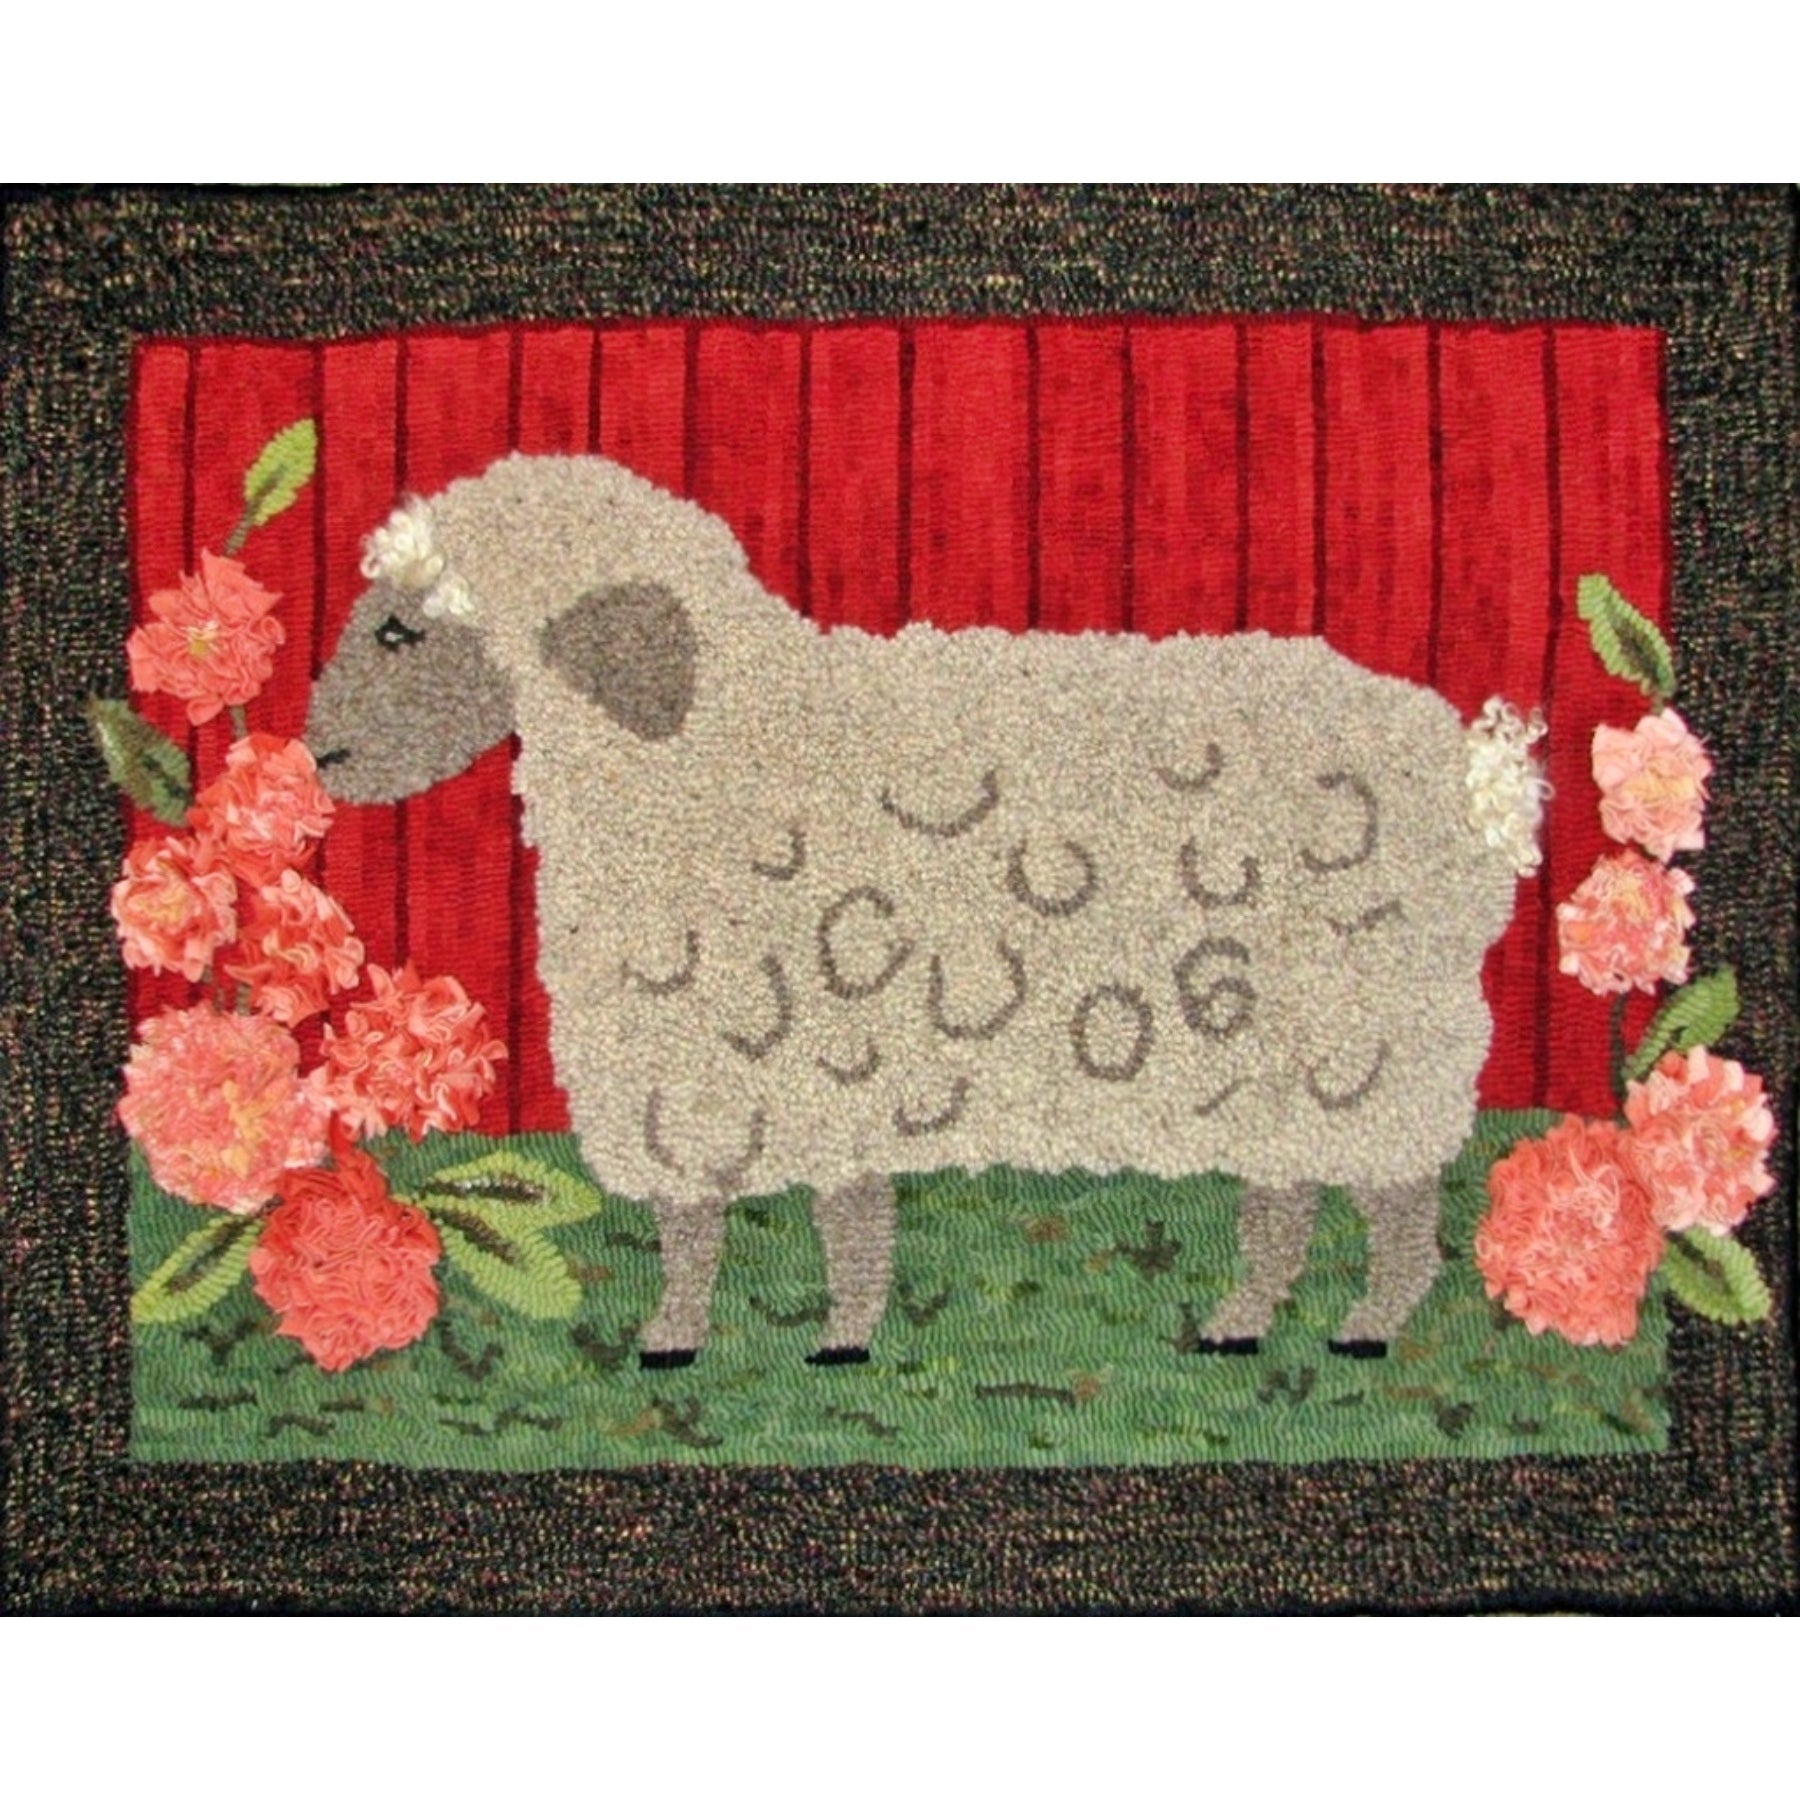 Sally In The Flowers, rug hooked by Judy Carter